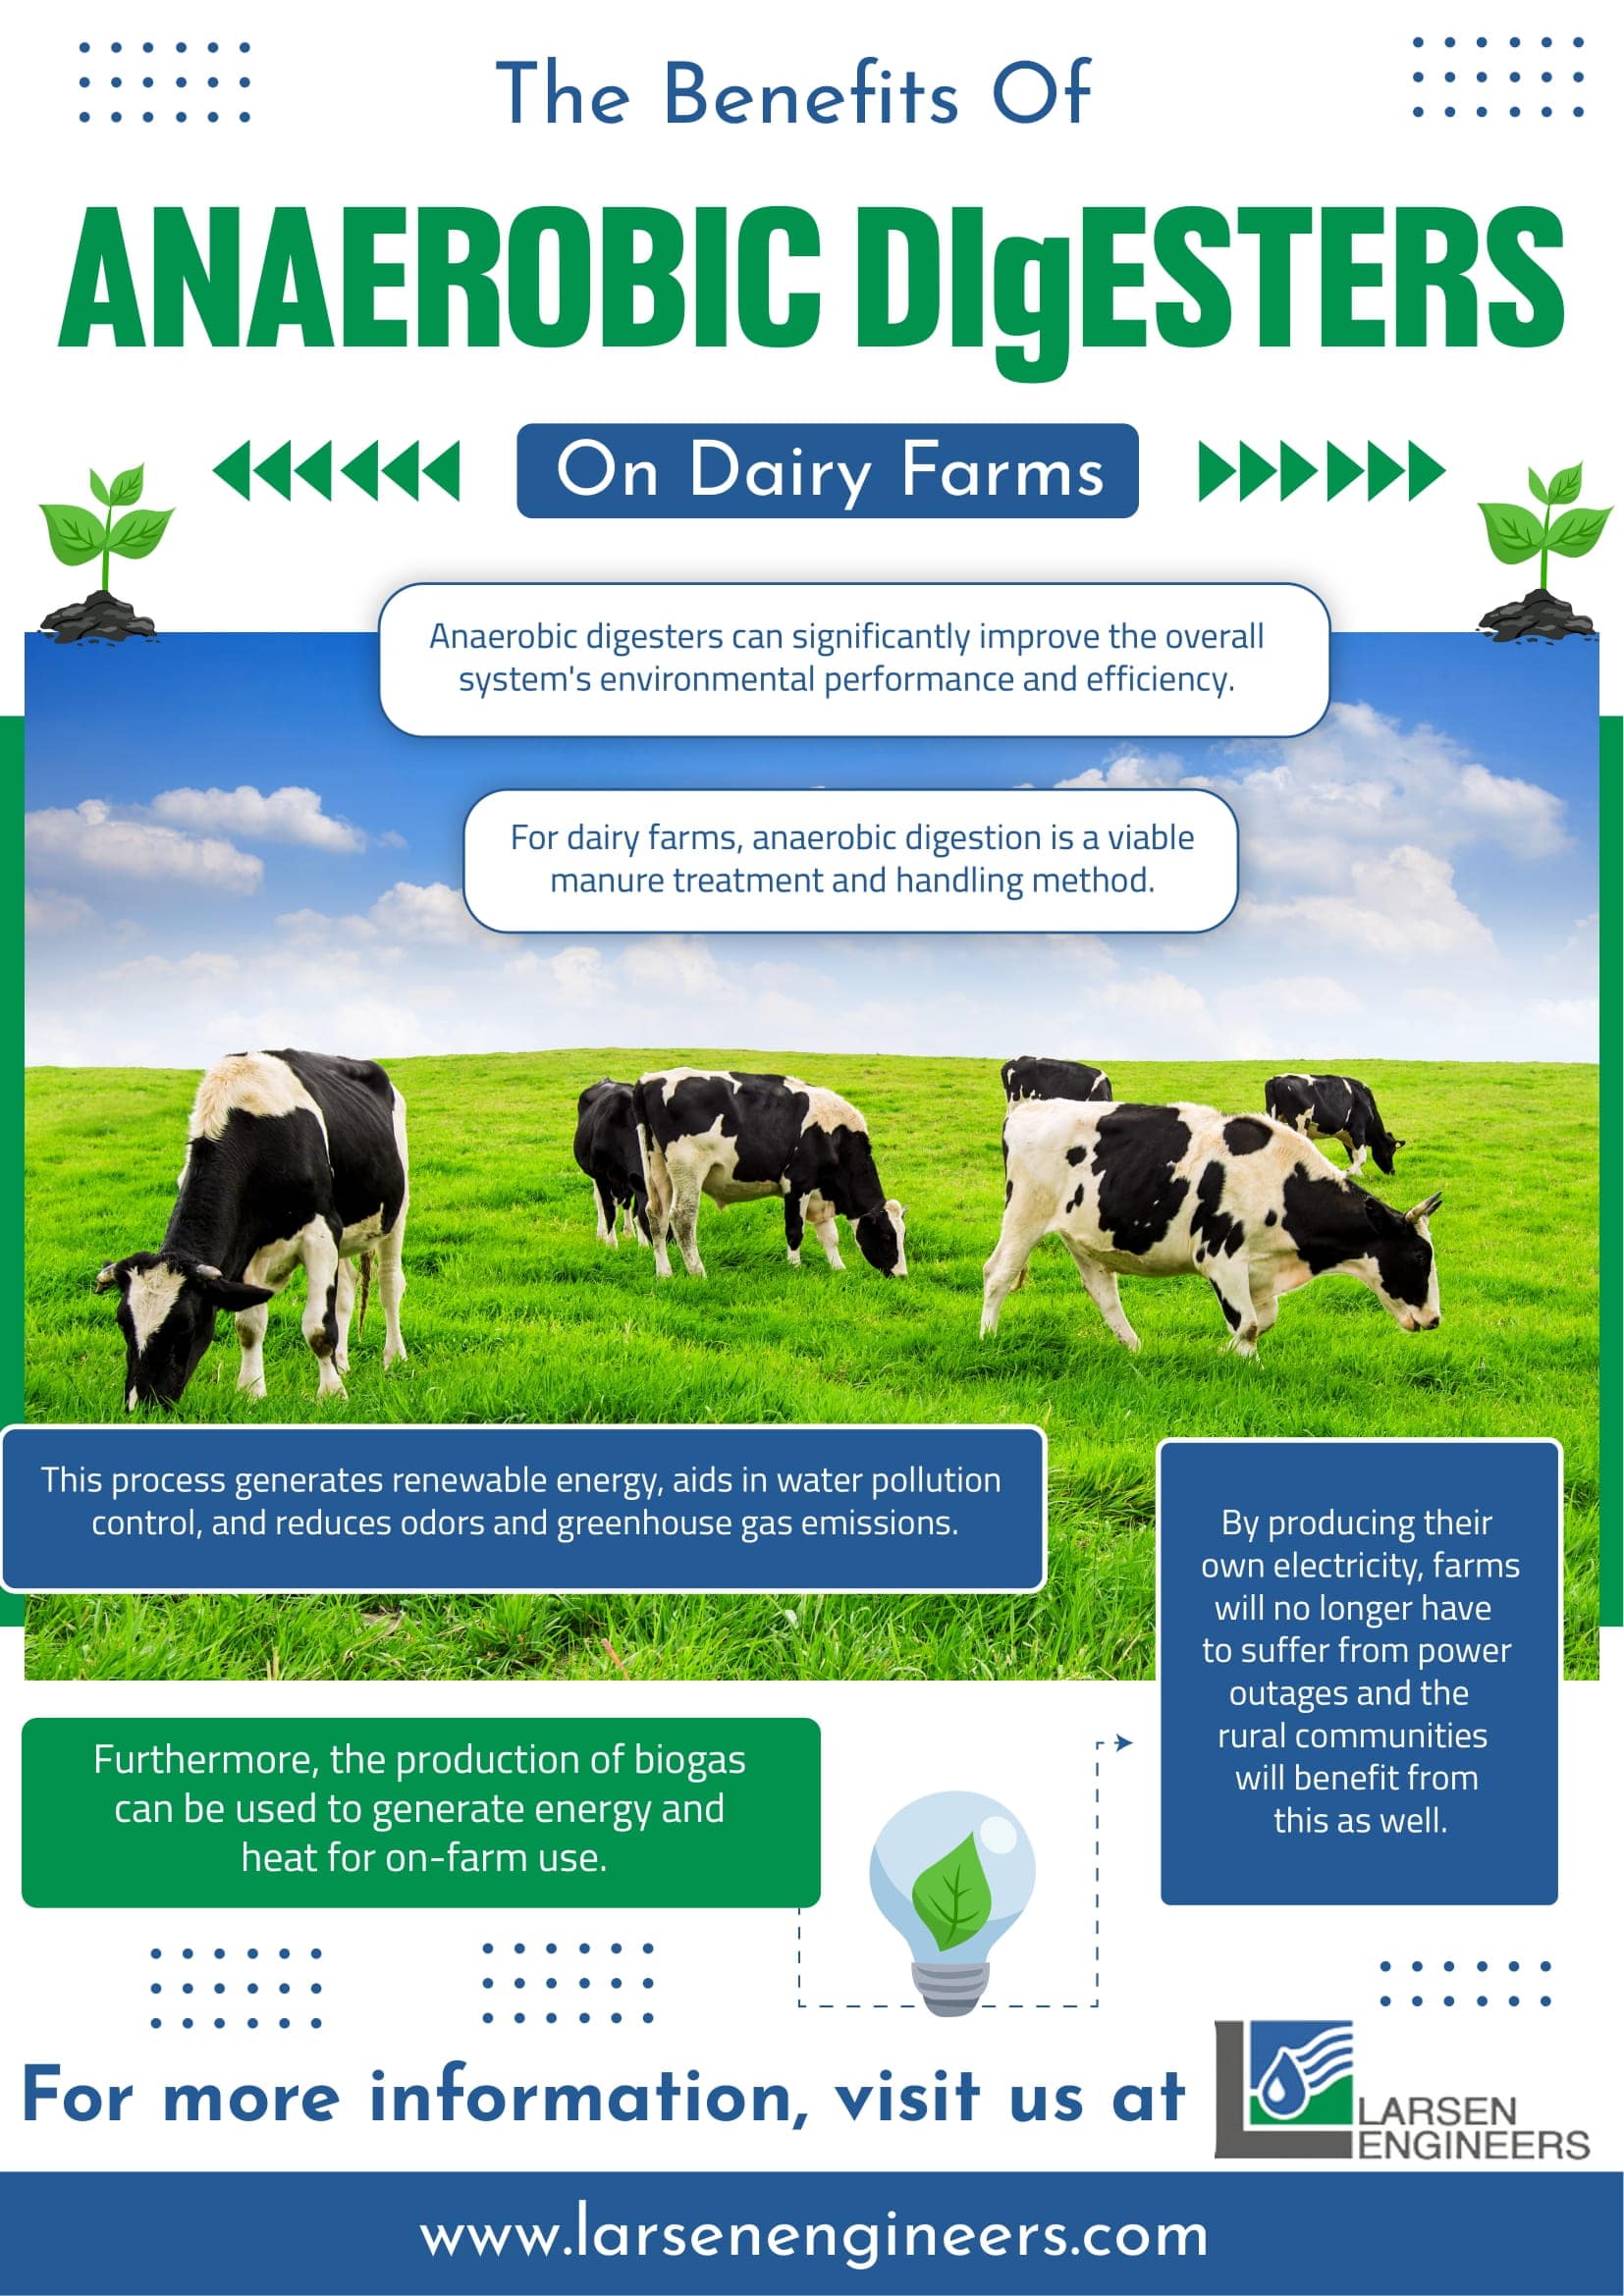 The Benefits Of Anaerobic digesters on Dairy Farms